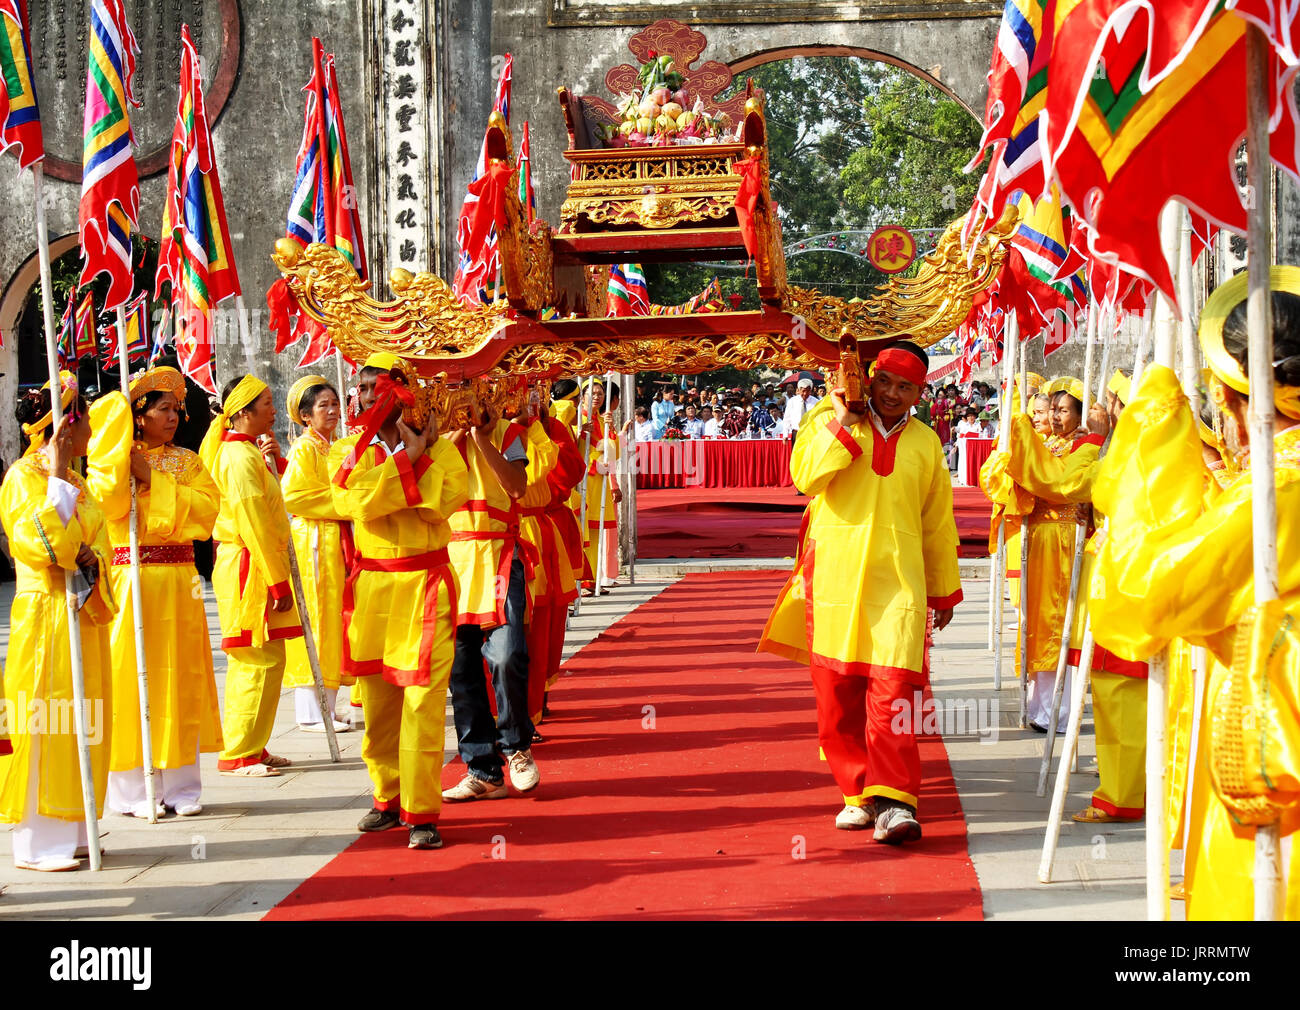 HAI DUONG, VIETNAM, February, 25: Group of people palanquin procession ...